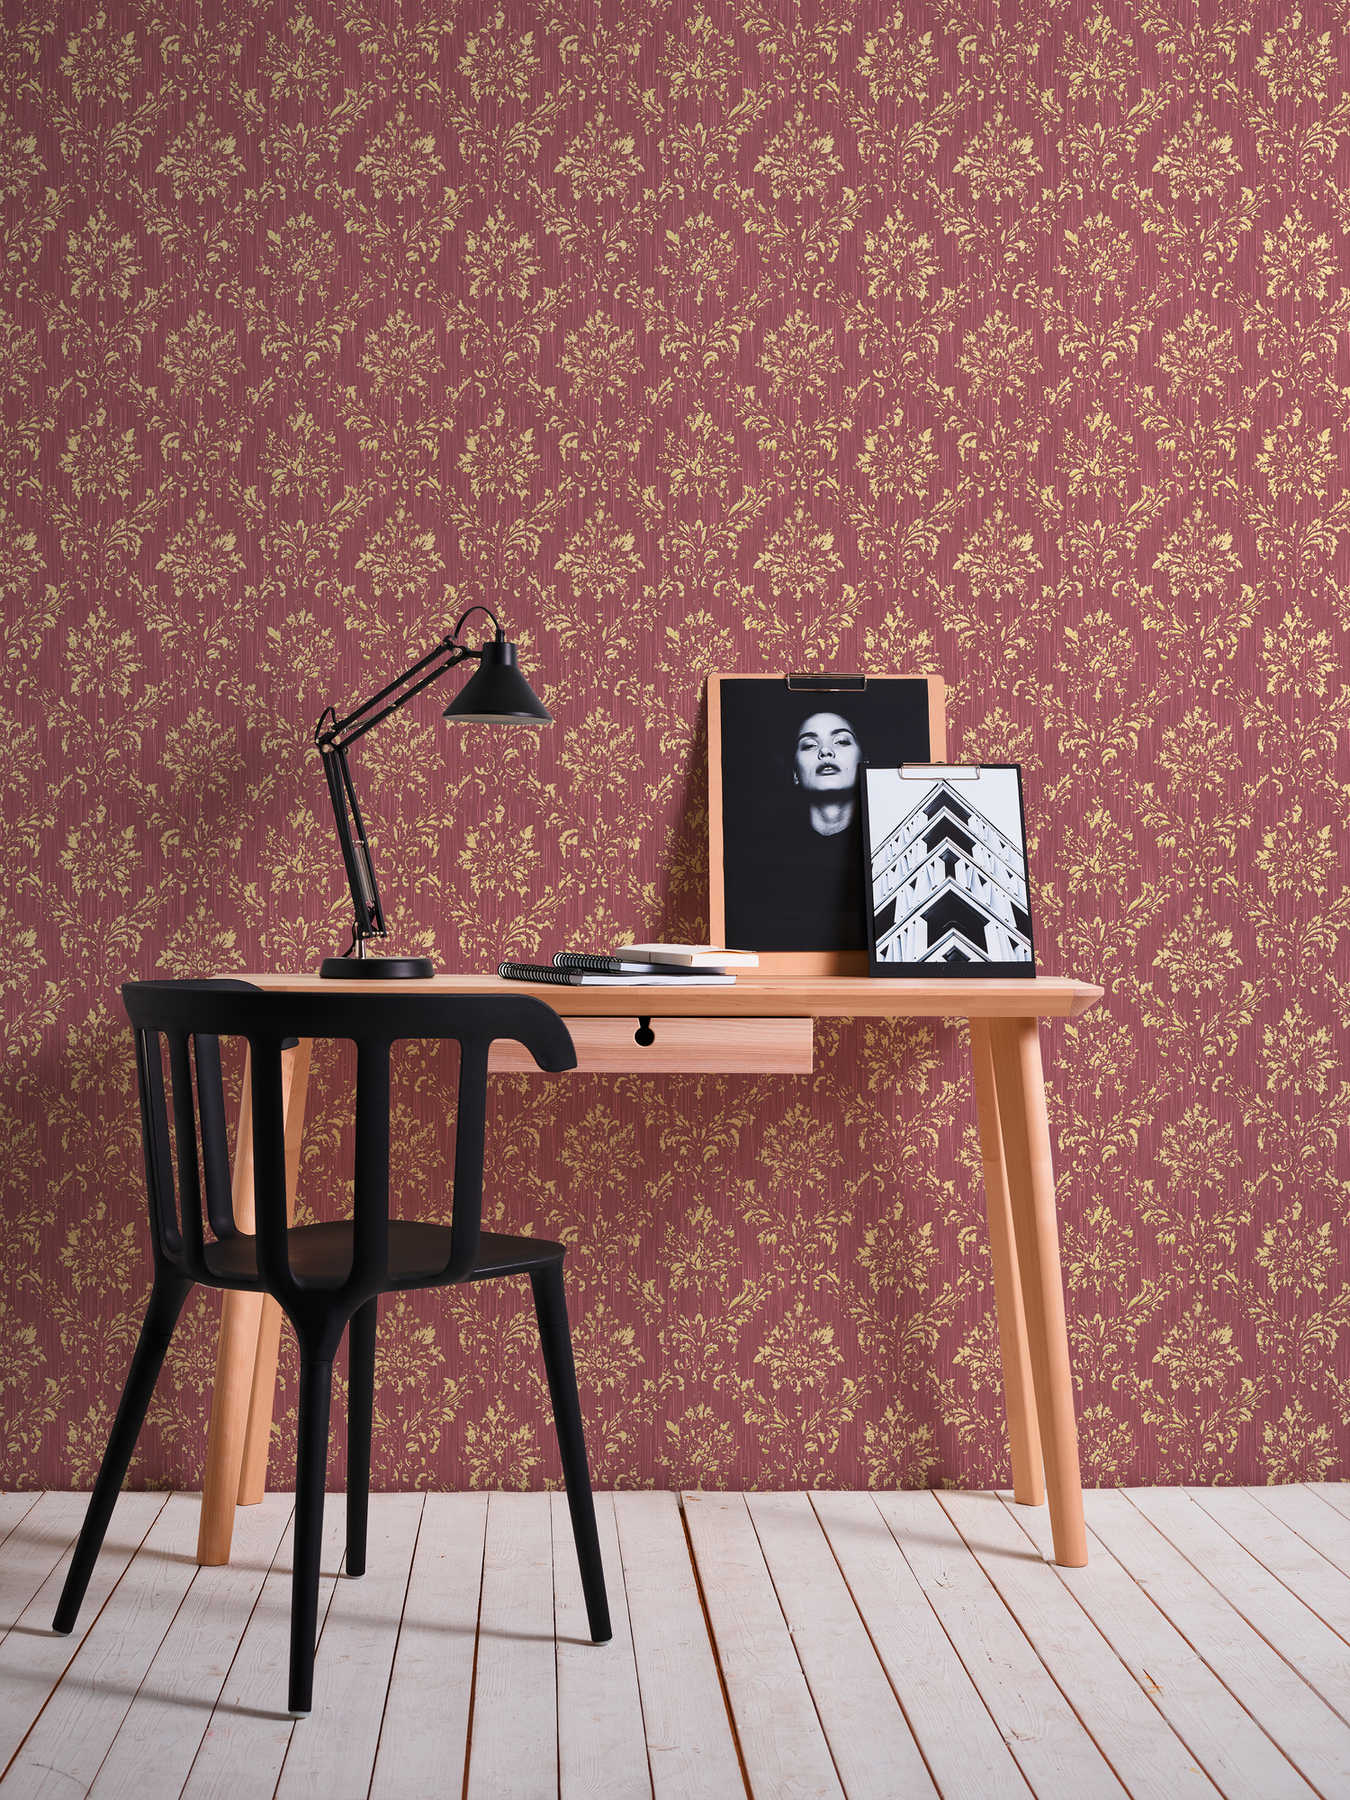             Wallpaper with gold ornaments in used look - red, gold
        